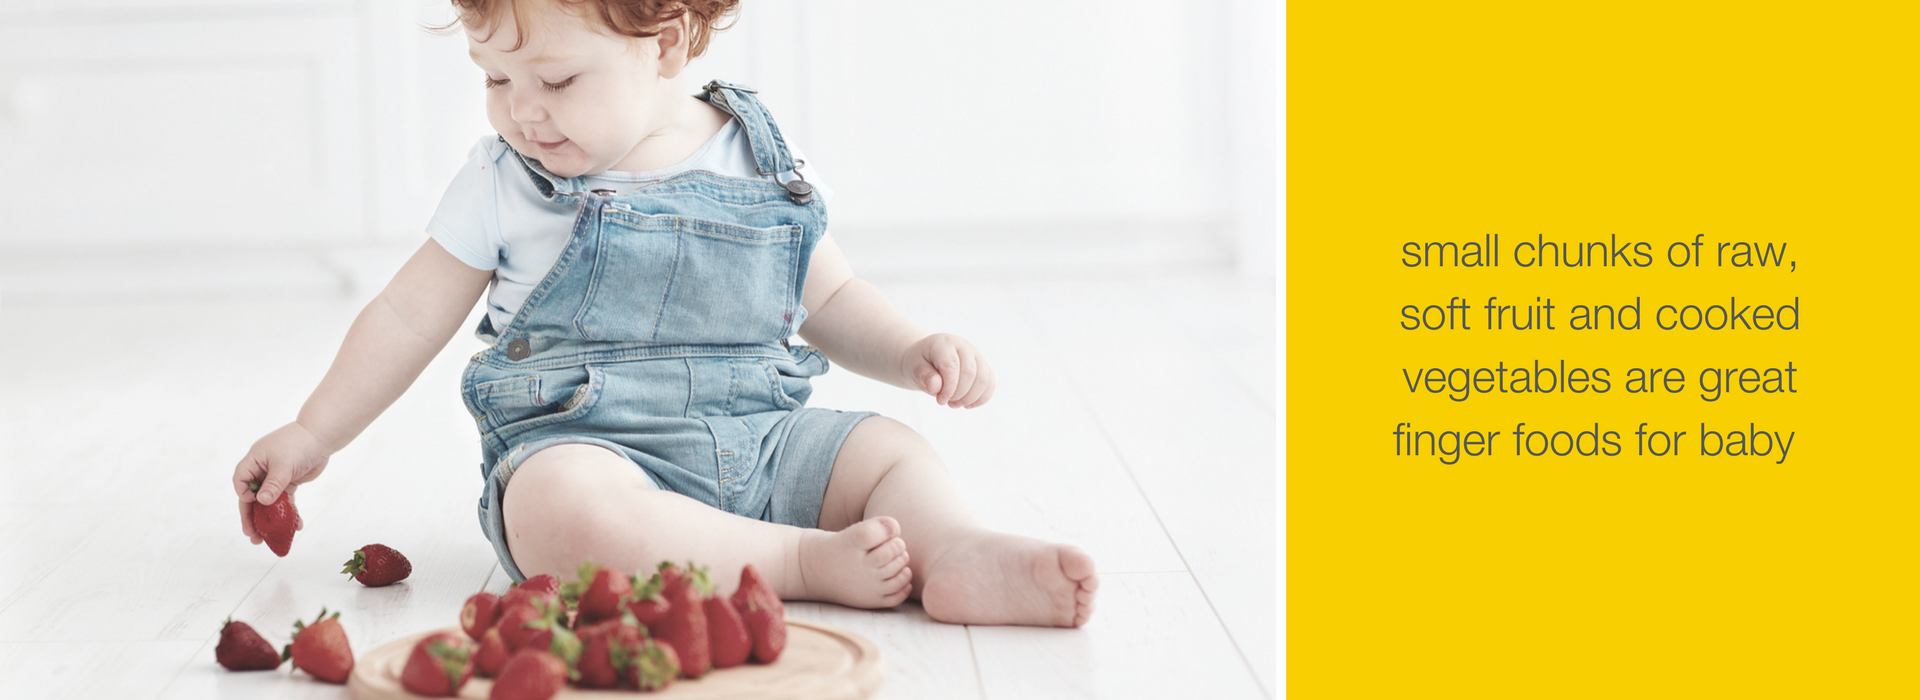 Going from breastfeeding or bottle feeding to eating solids can be a big deal for both parents & their little ones. Suddenly your infant, who survived only on liquids for months, is now interested in solid food! That’s why we’ve created an easy to follow timeline of when to introduce certain foods by age. Read on to learn our top baby food guidelines & tips to help your baby develop a lifetime of healthy eating habits! BubziCo Best Baby Stuff + Products + Must Have Essentials + New Mommy Advice 